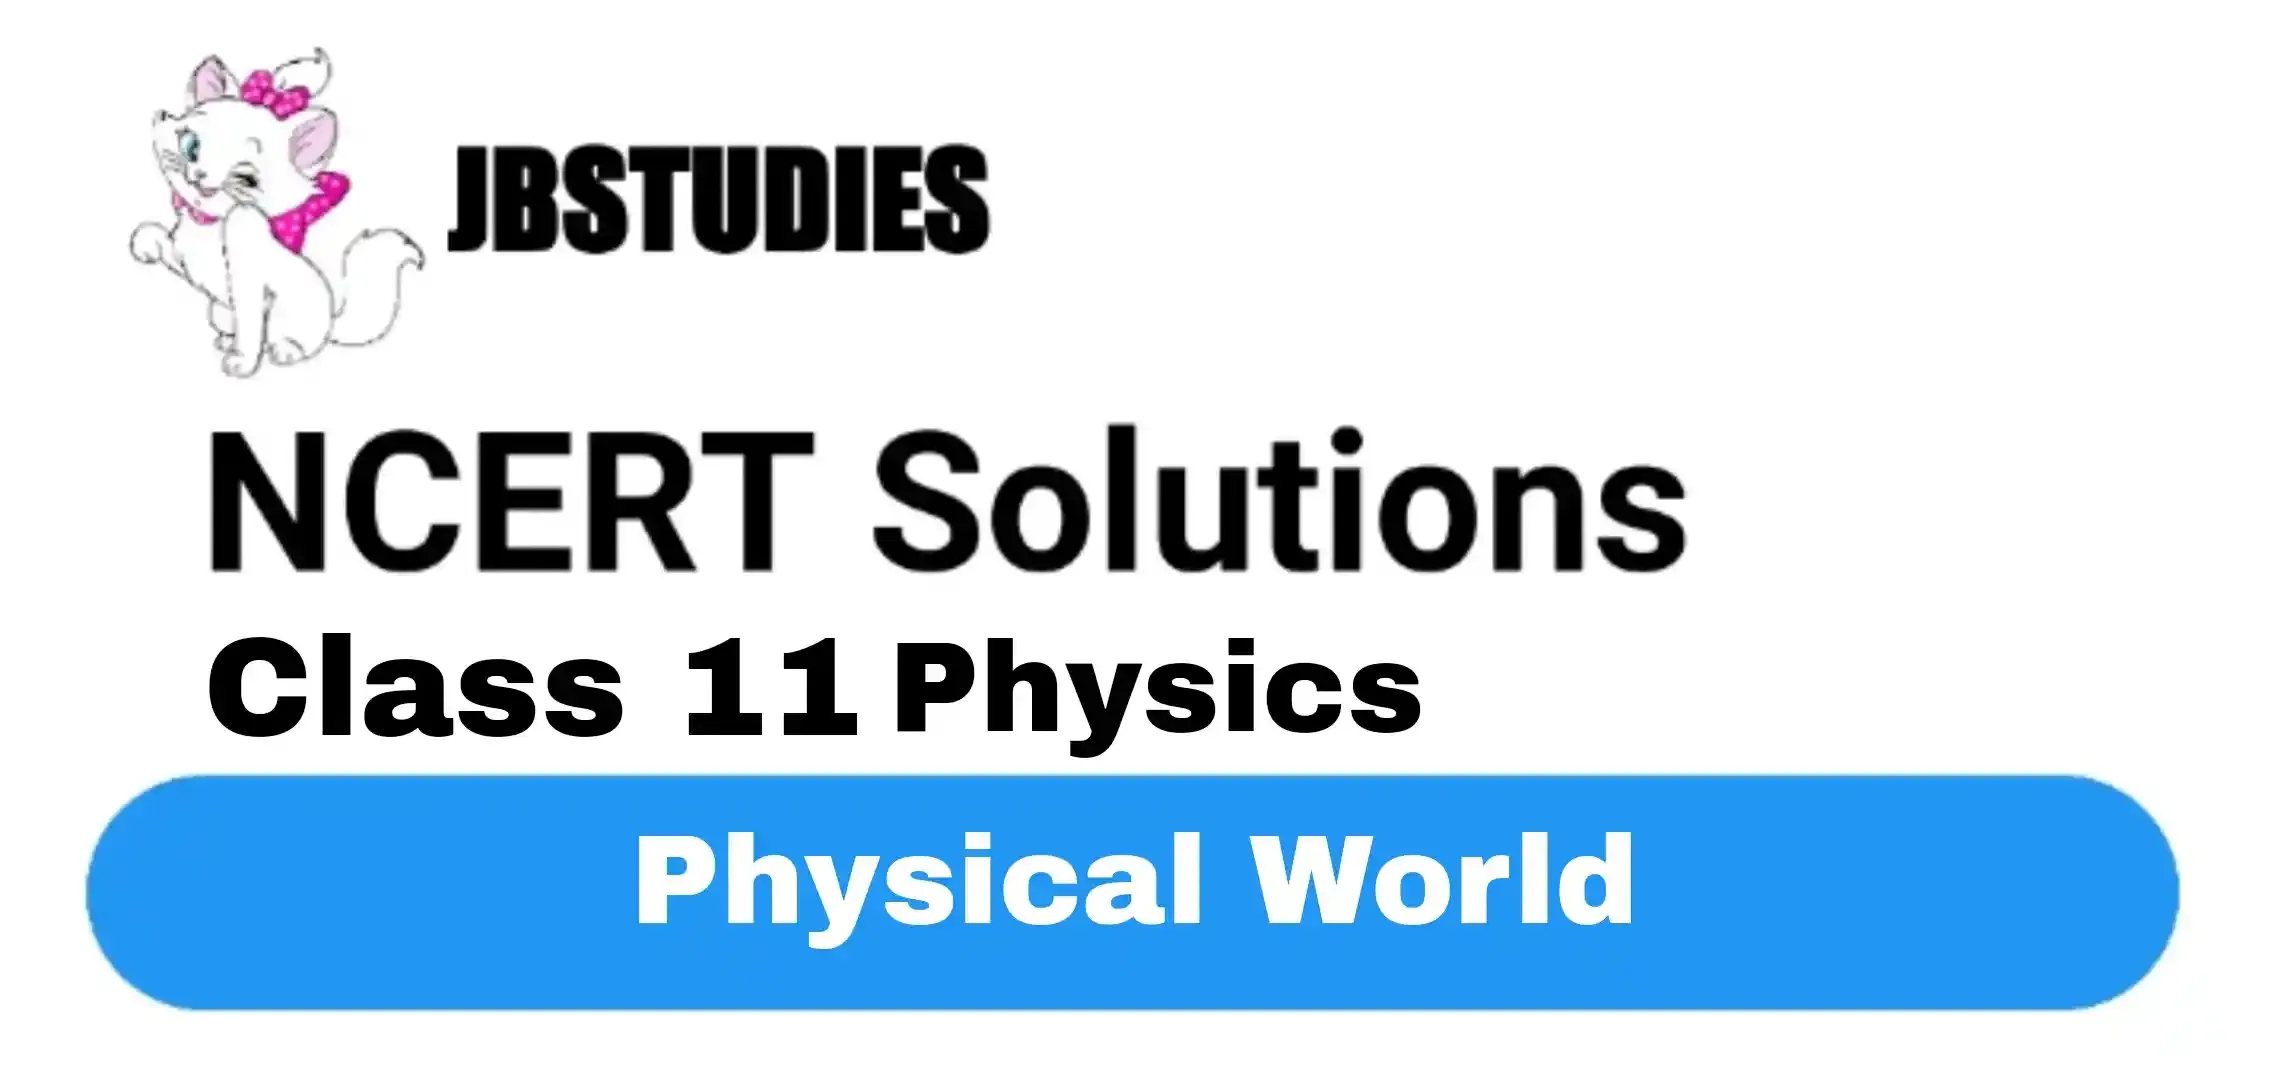 Solutions Class 11 Physics Chapter -1 (Physical World)